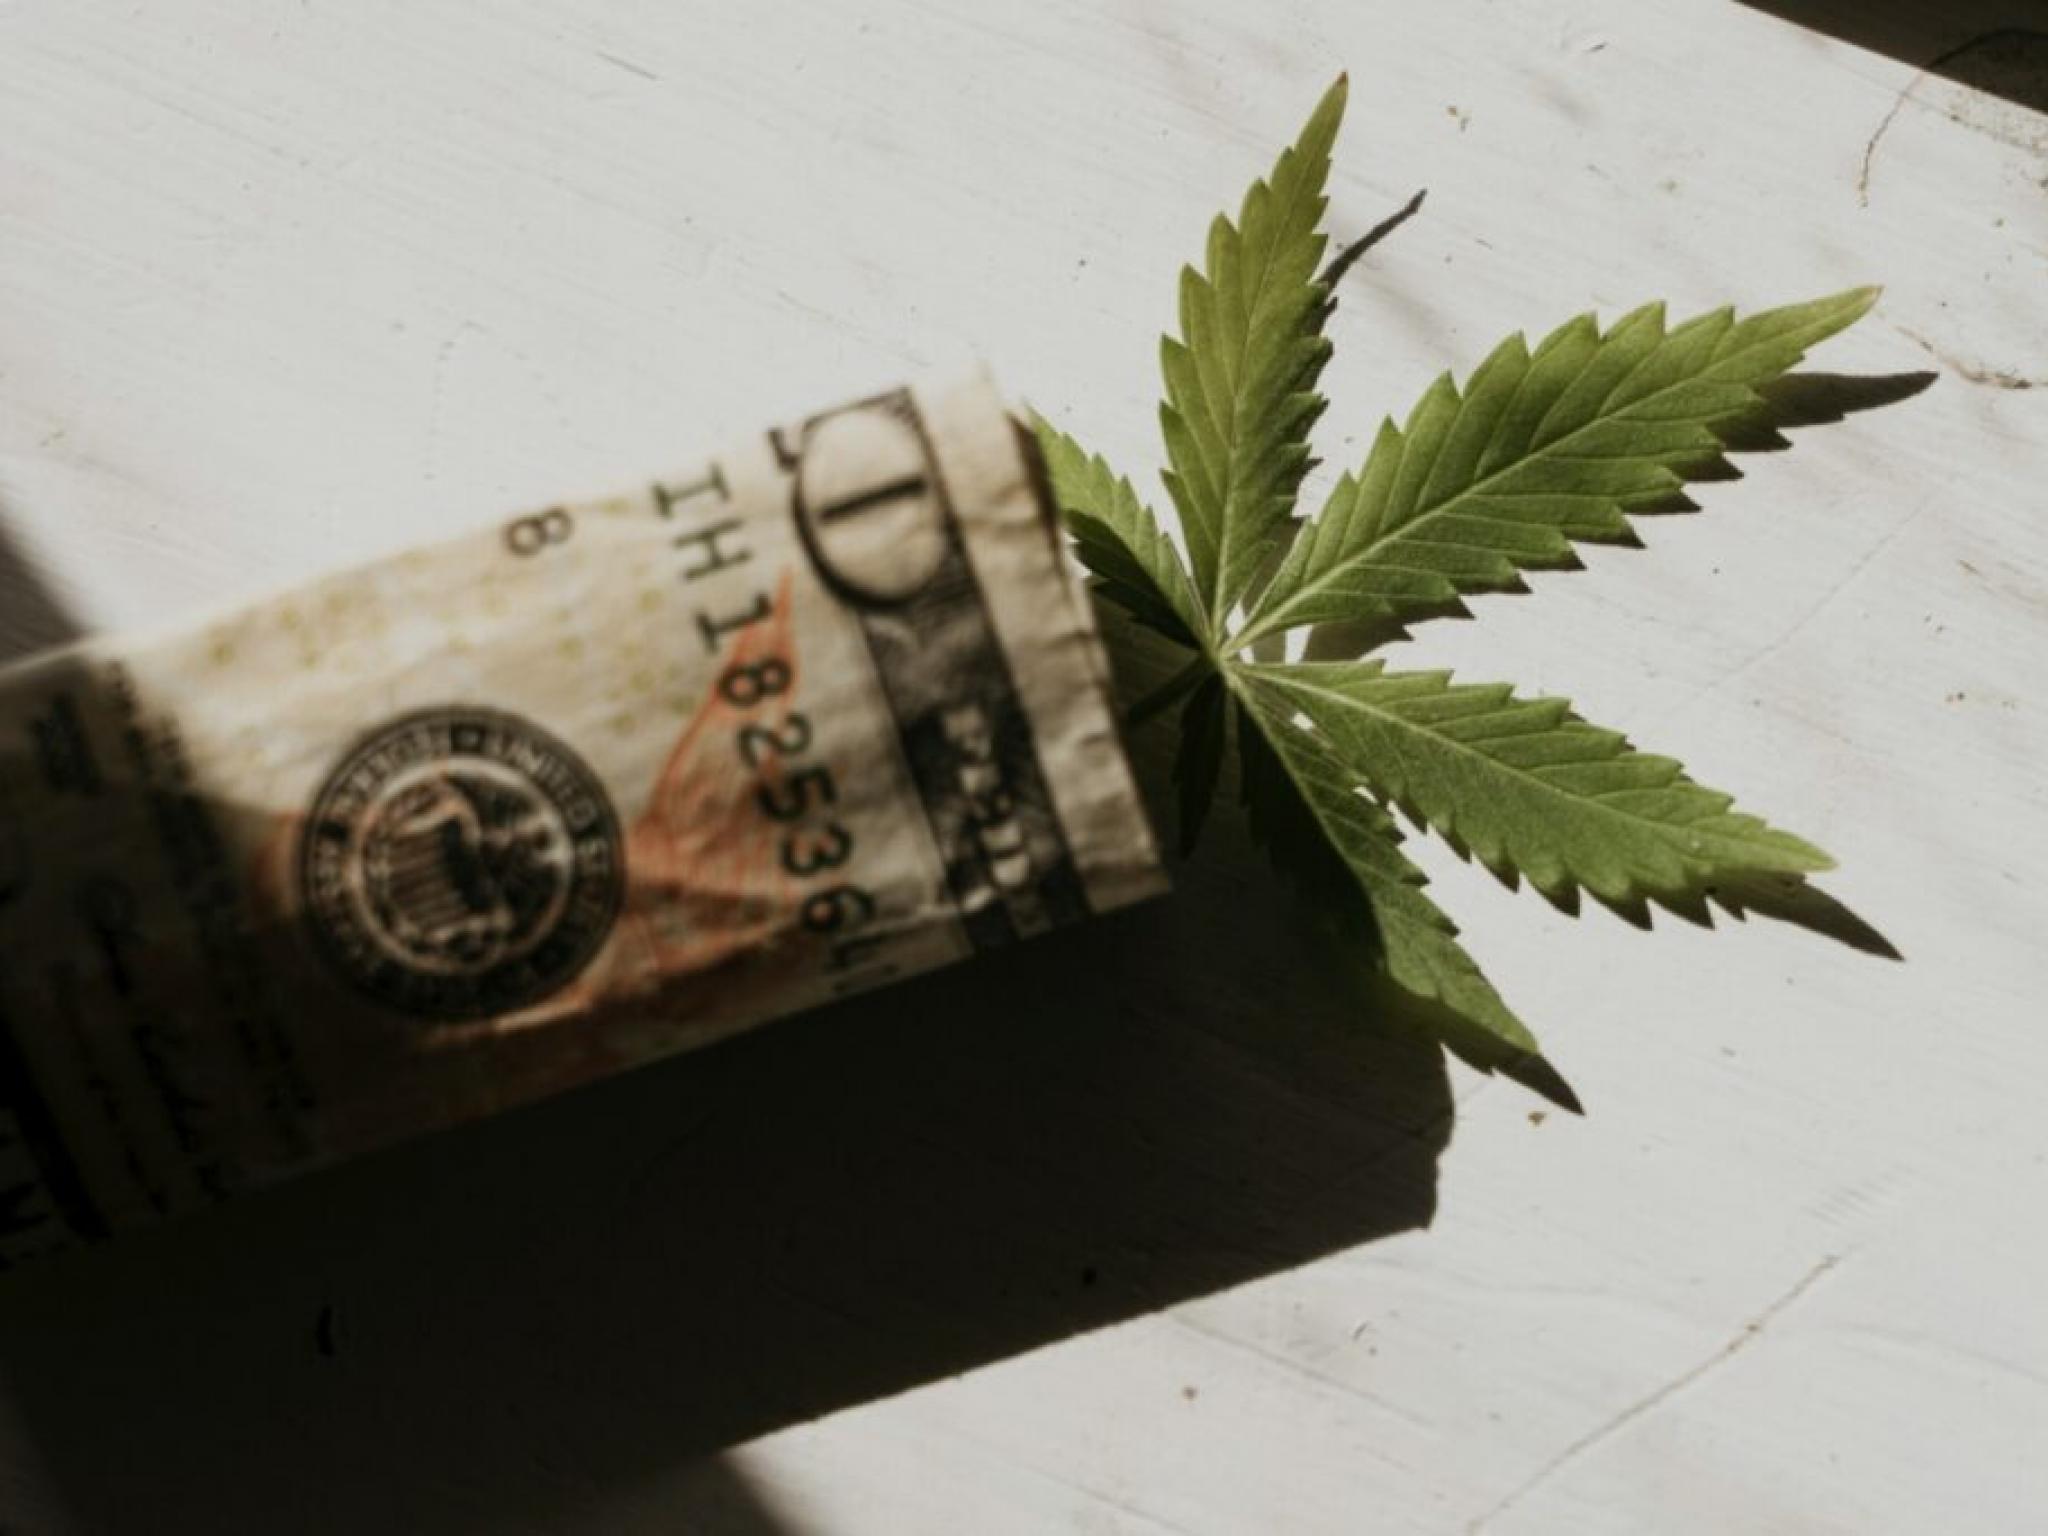  craft-cannabis-co-grown-rogue-reports-gross-profit-increase-in-2023-ceo-signals-expansion 